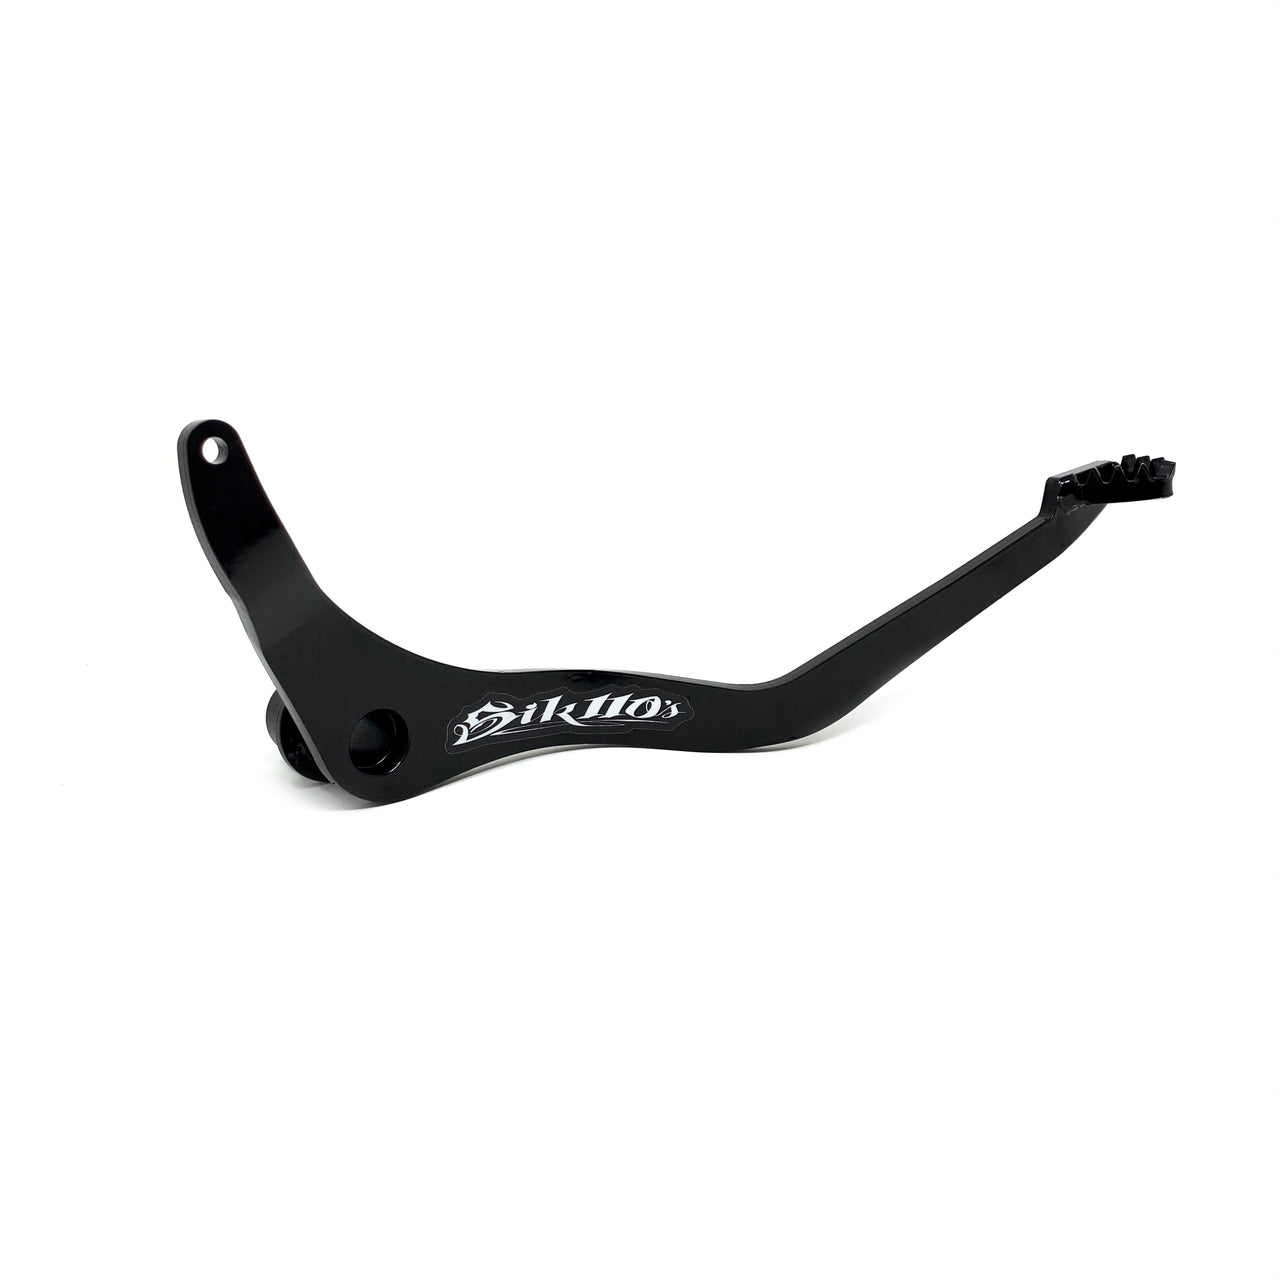 Sik110 Extended HD Brake Pedal - CRF110